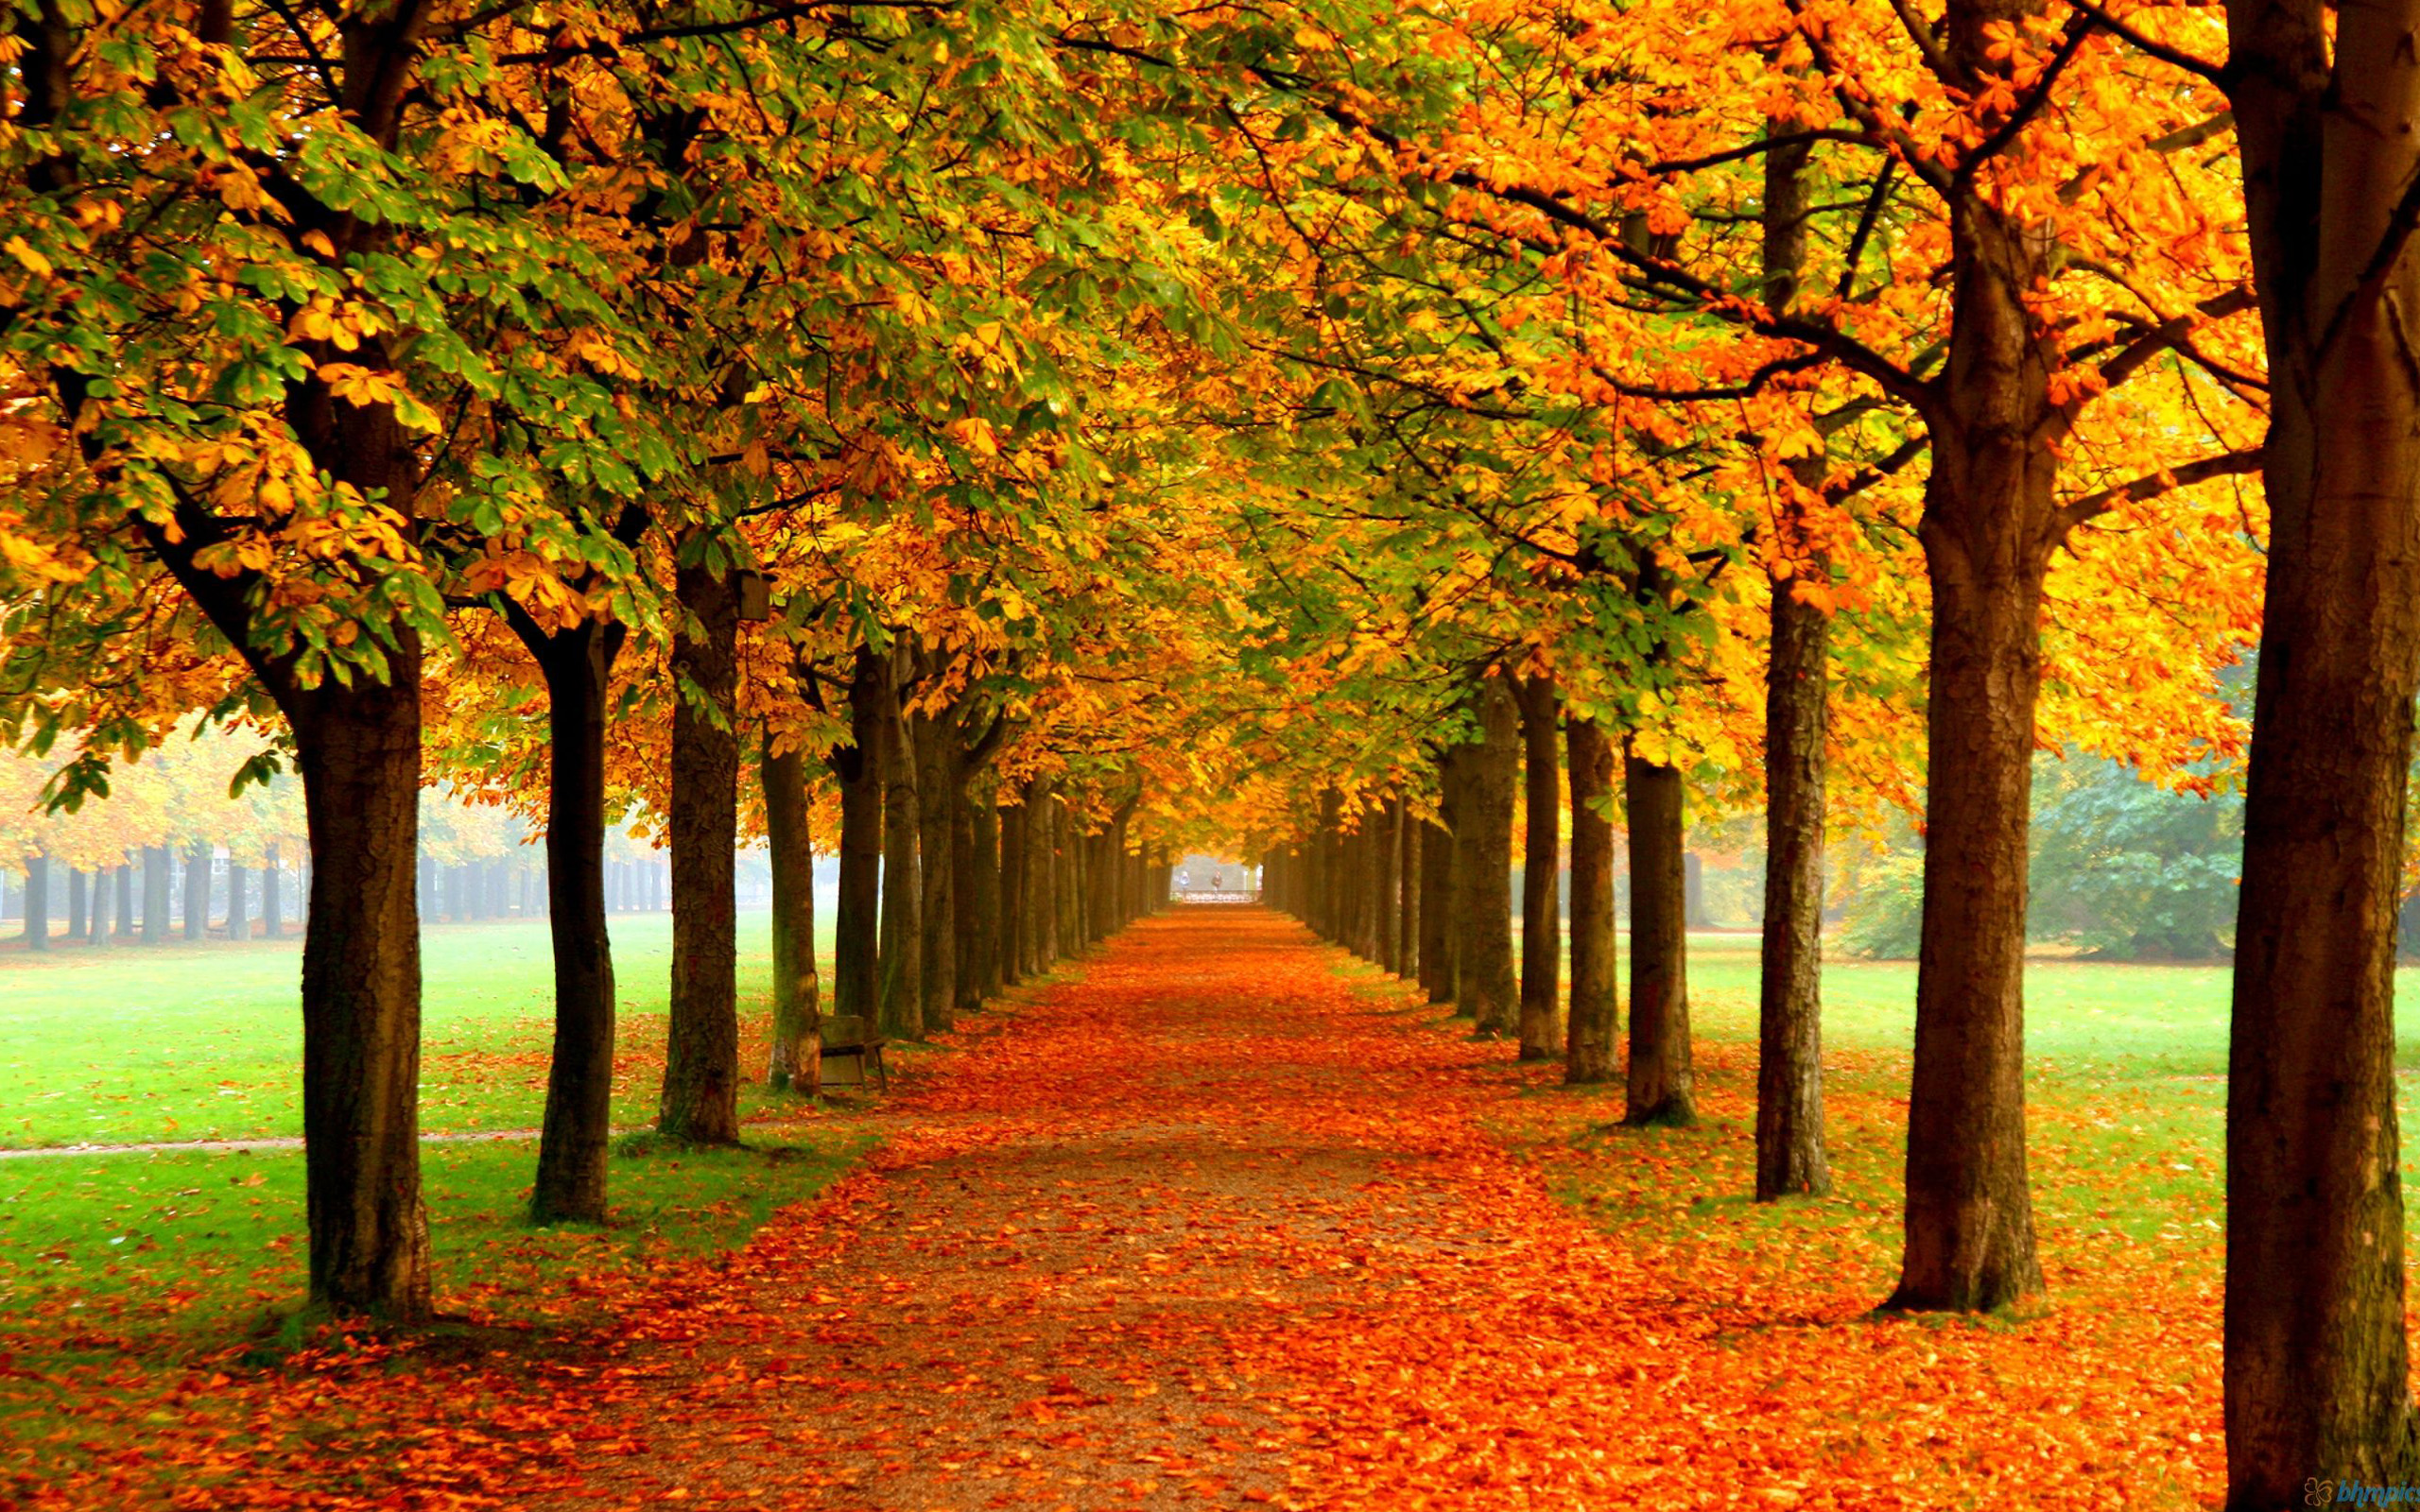 Free Nature Wallpaper with Autumn Trees and Straight Street Wallpaper. Wallpaper Download. High Resolution Wallpaper